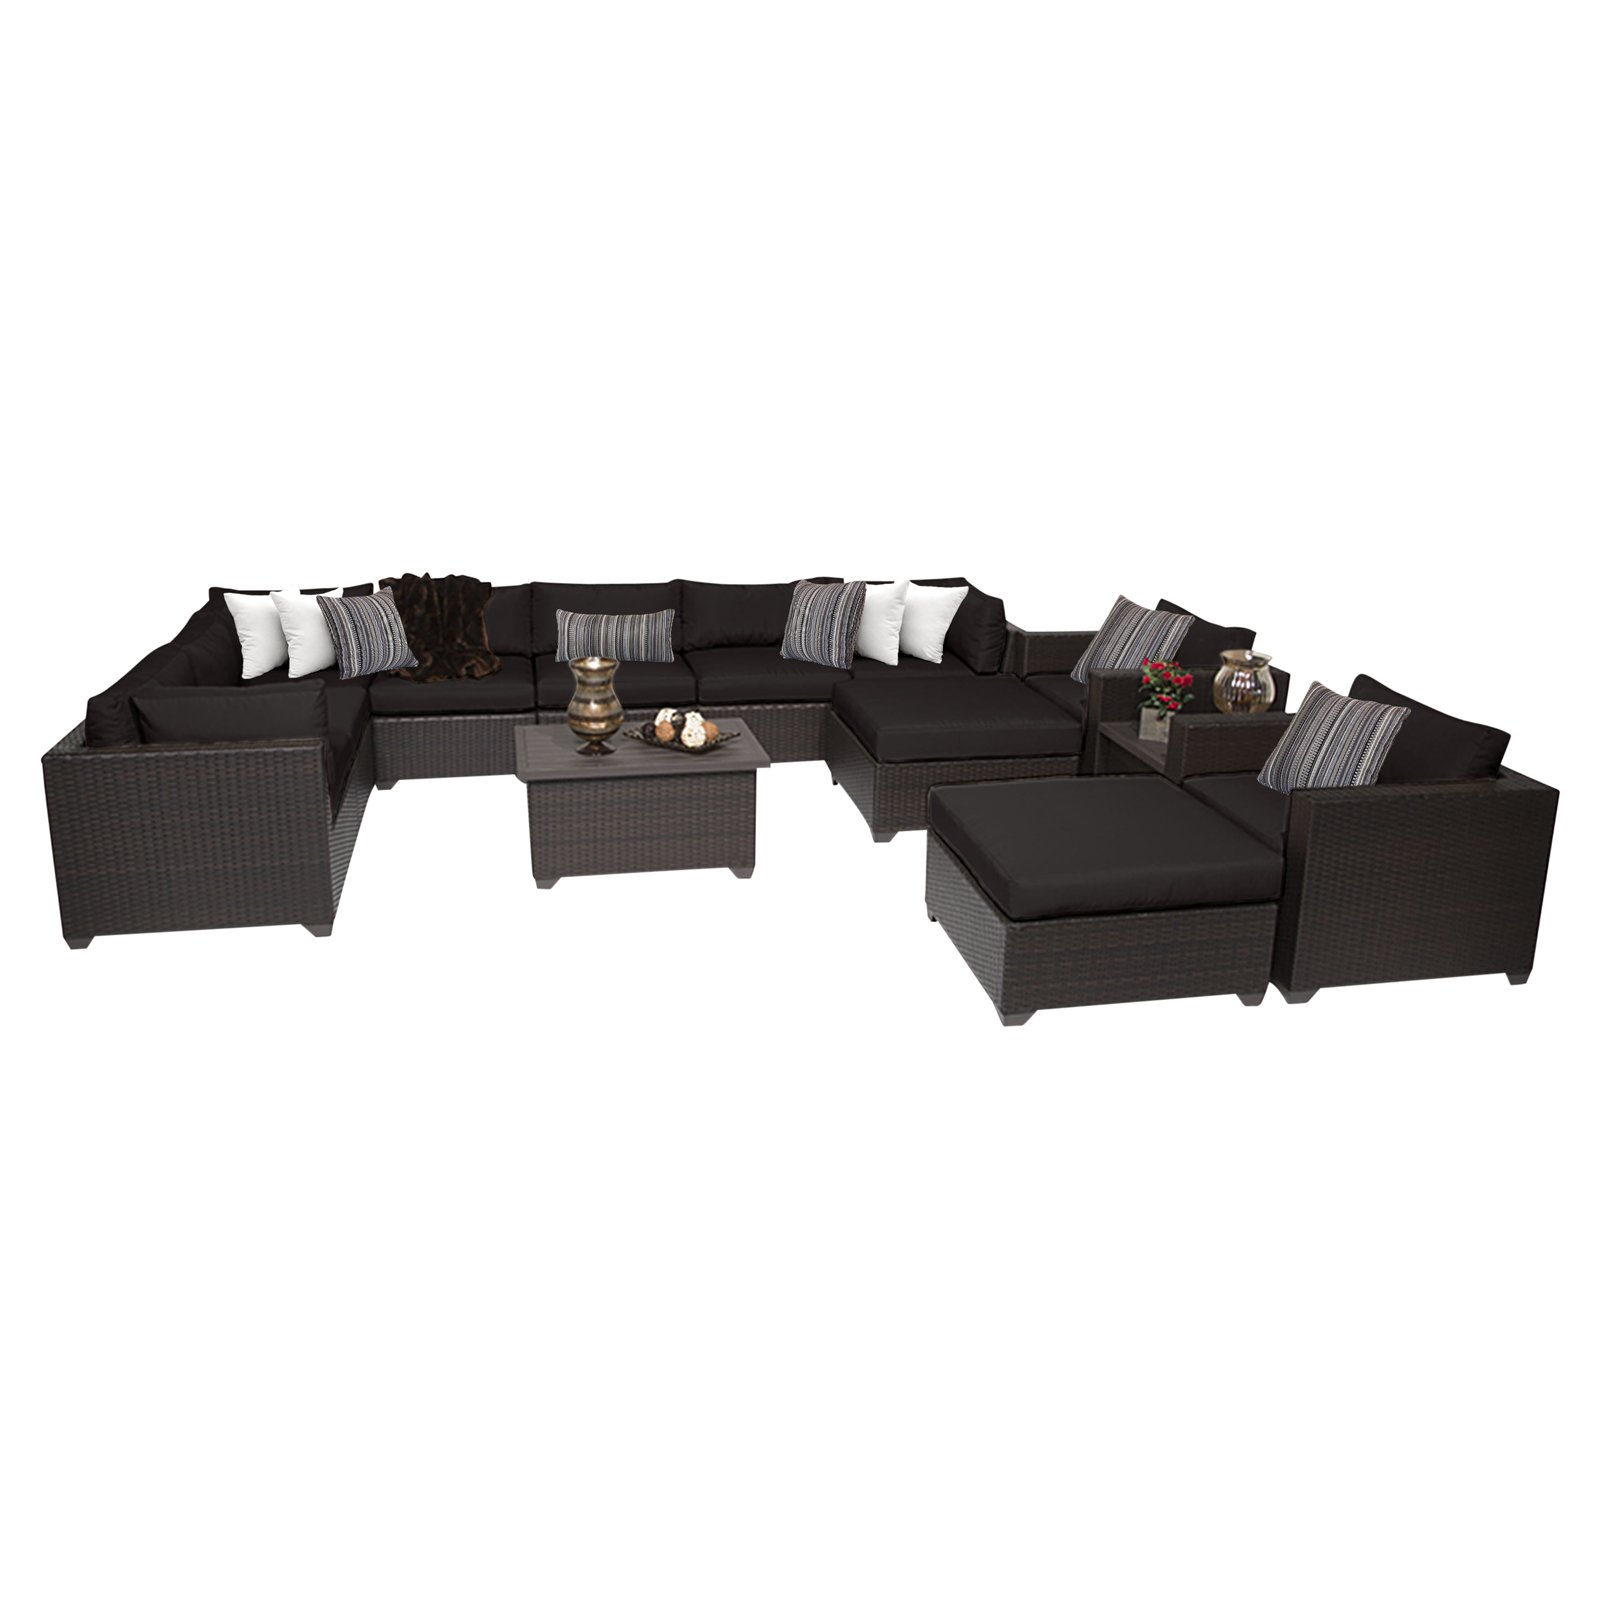 Belle 13 Piece Outdoor Wicker Patio Furniture Set 13a in Black - image 1 of 2